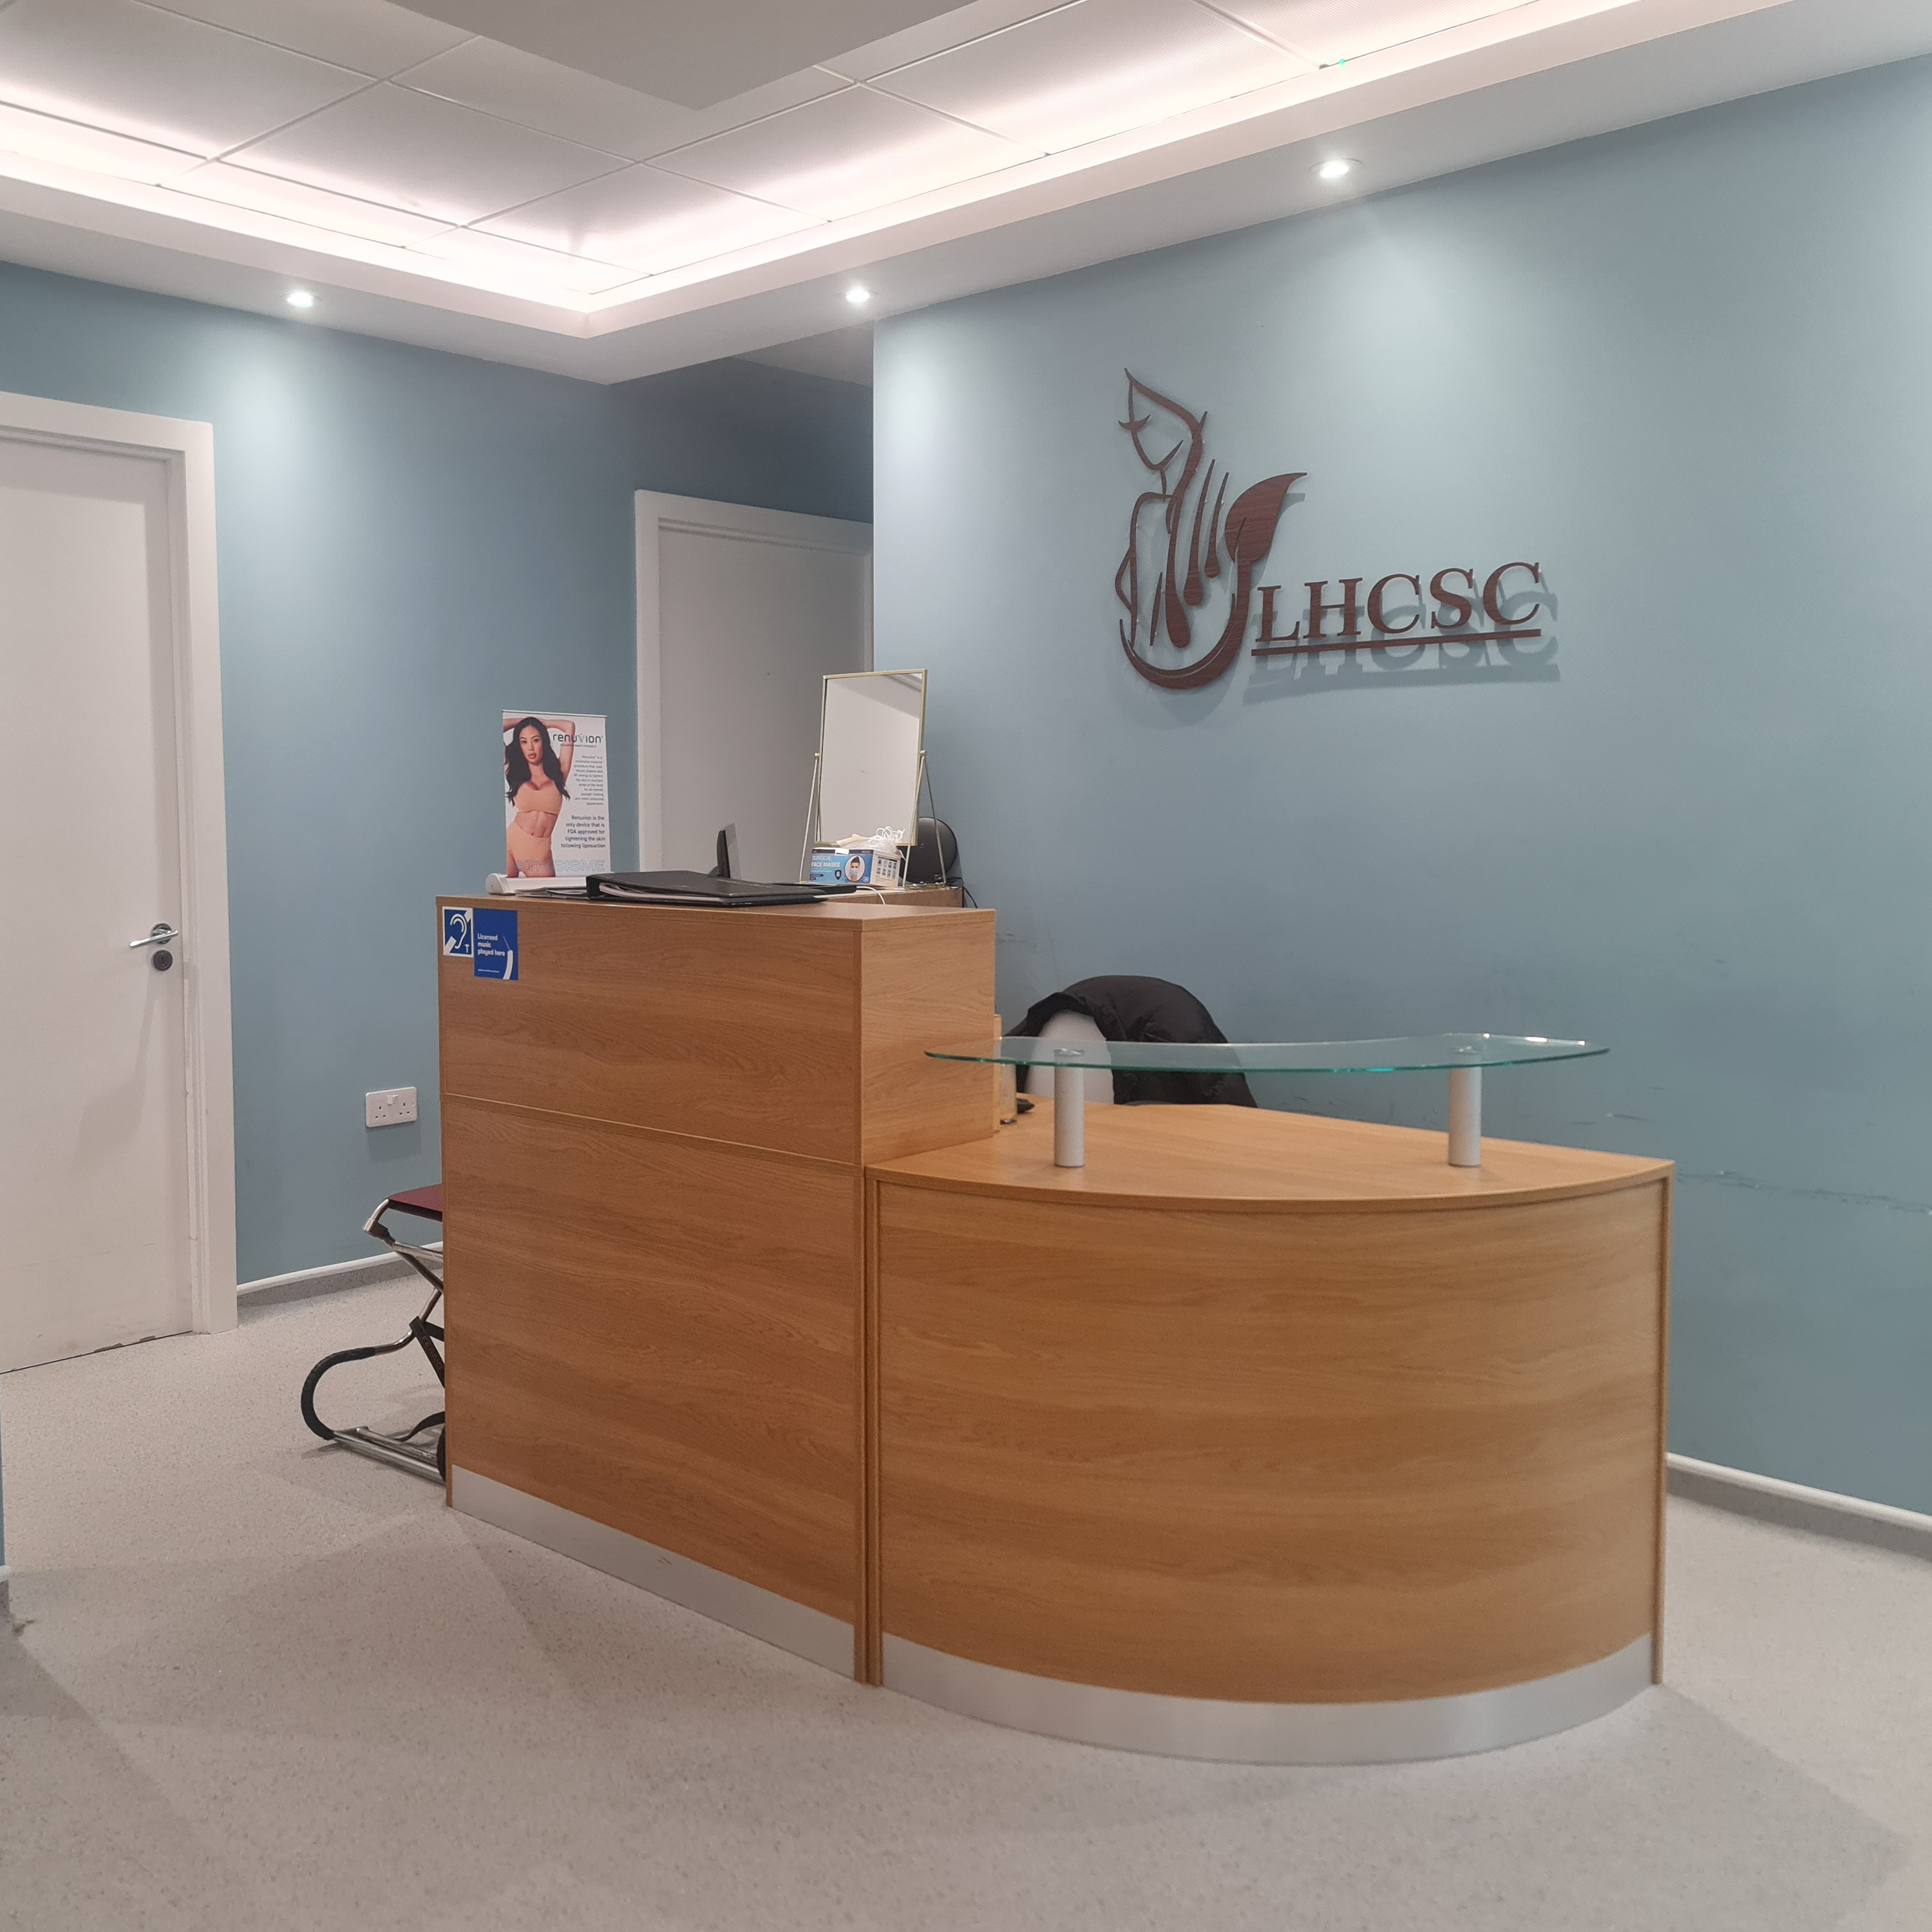 London Hair and Cosmetic Surgical Centre (LHCSC)